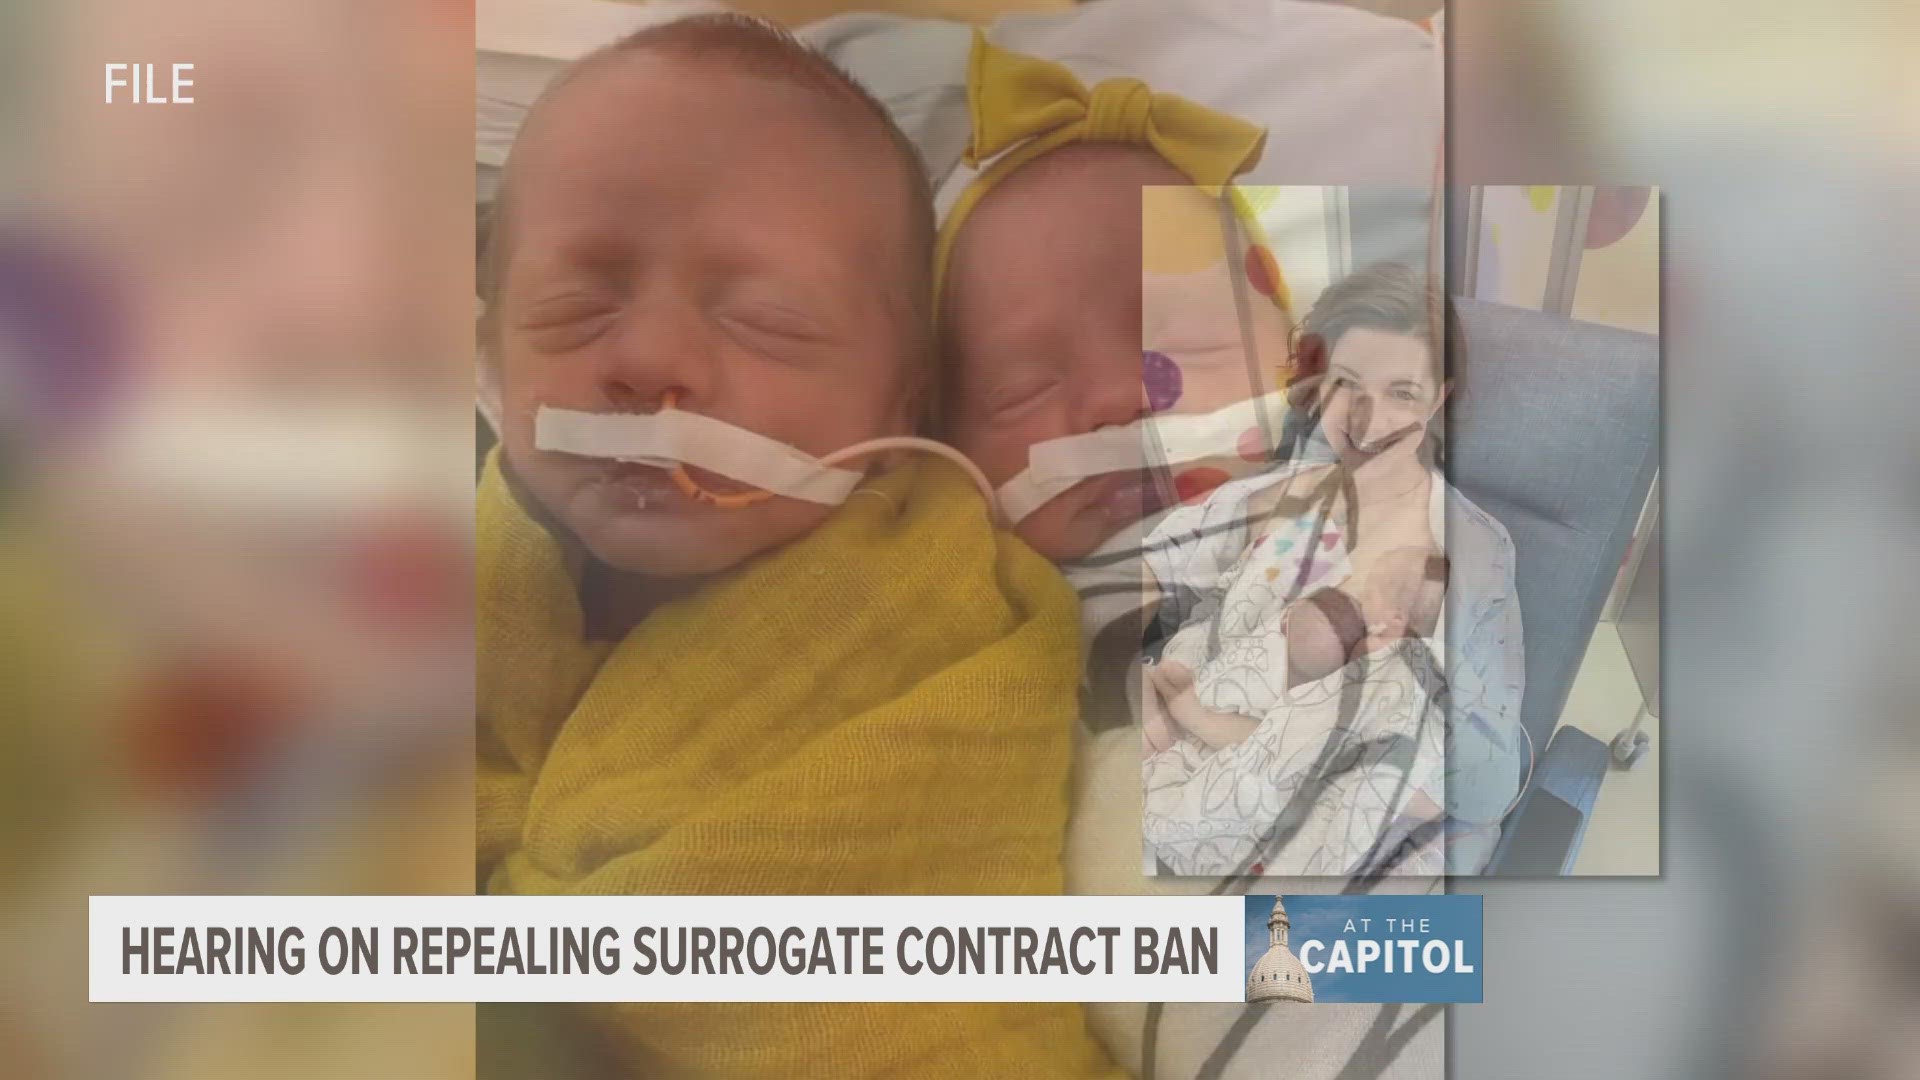 Proposed legislation would rollback several restrictions and allow couples to pay a woman to carry their child to birth.